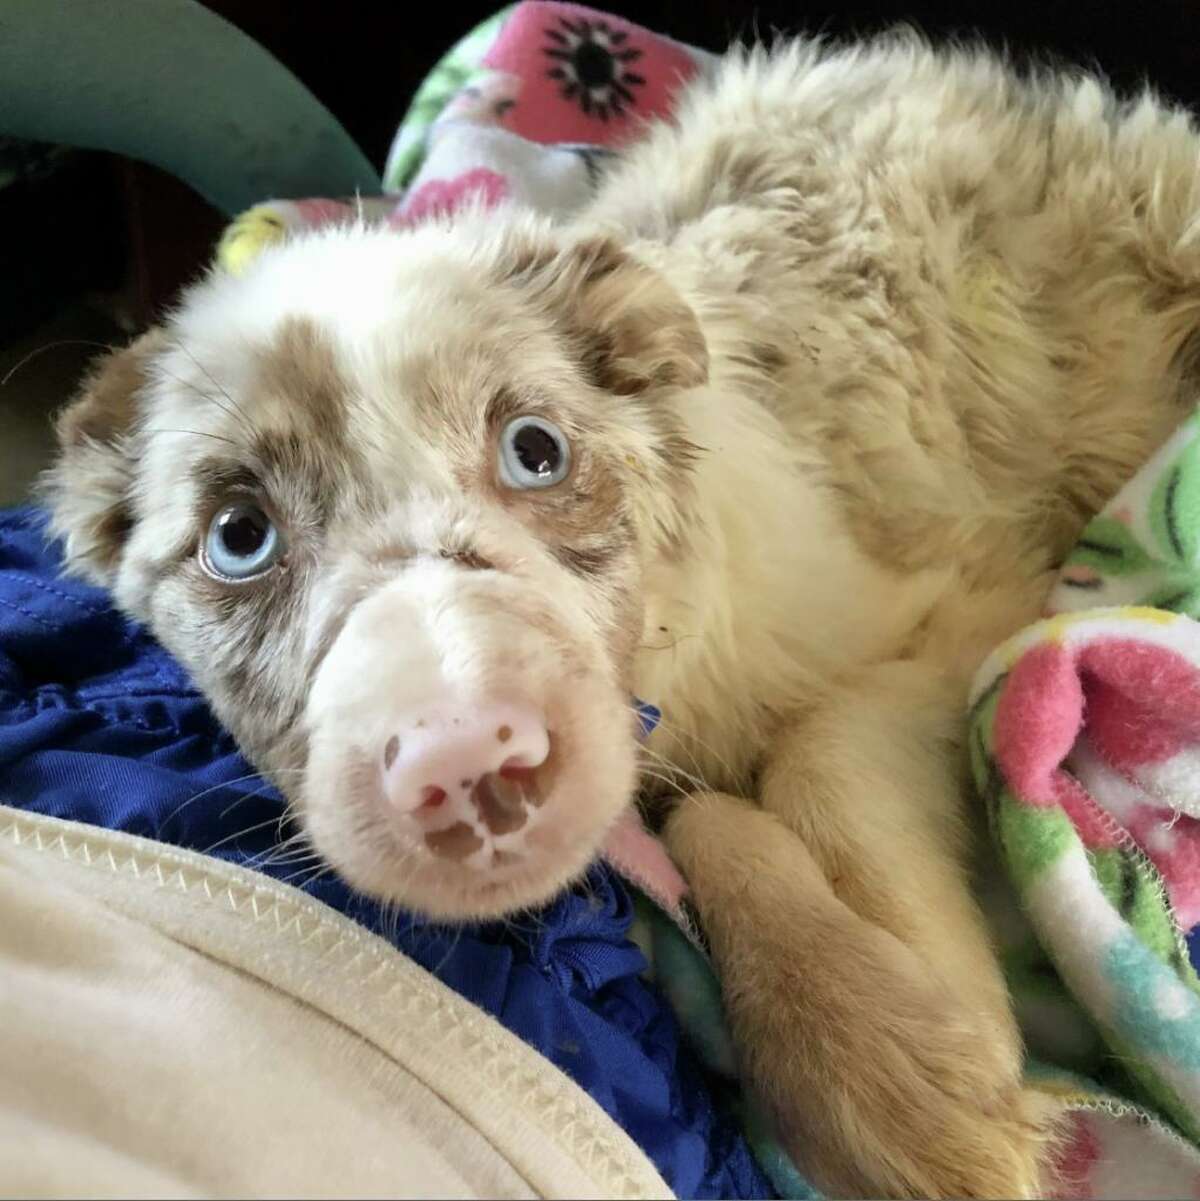 Bonnie Blue Eyes, an Australian Shepherd, was surrendered to Animal Care Services under "mysterious" circumstances. The neglect of the dog included its mouth being forced shut for a prolonged period of time.  